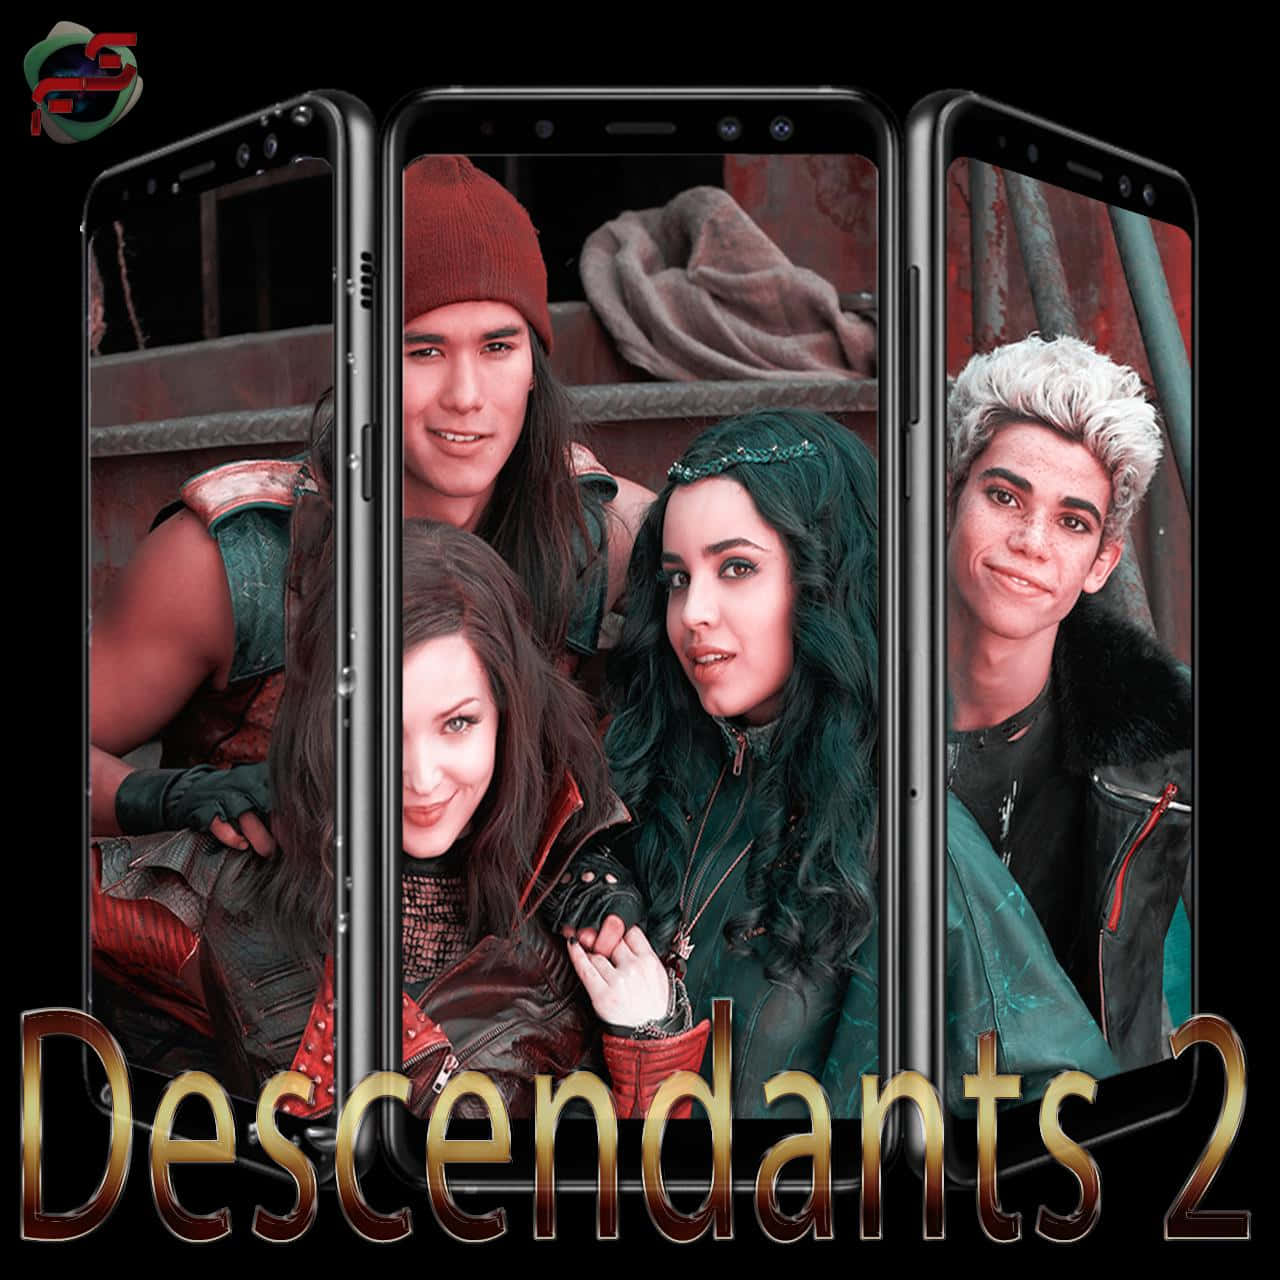 Descendants - Mal and Evie in Enchanted Fashion